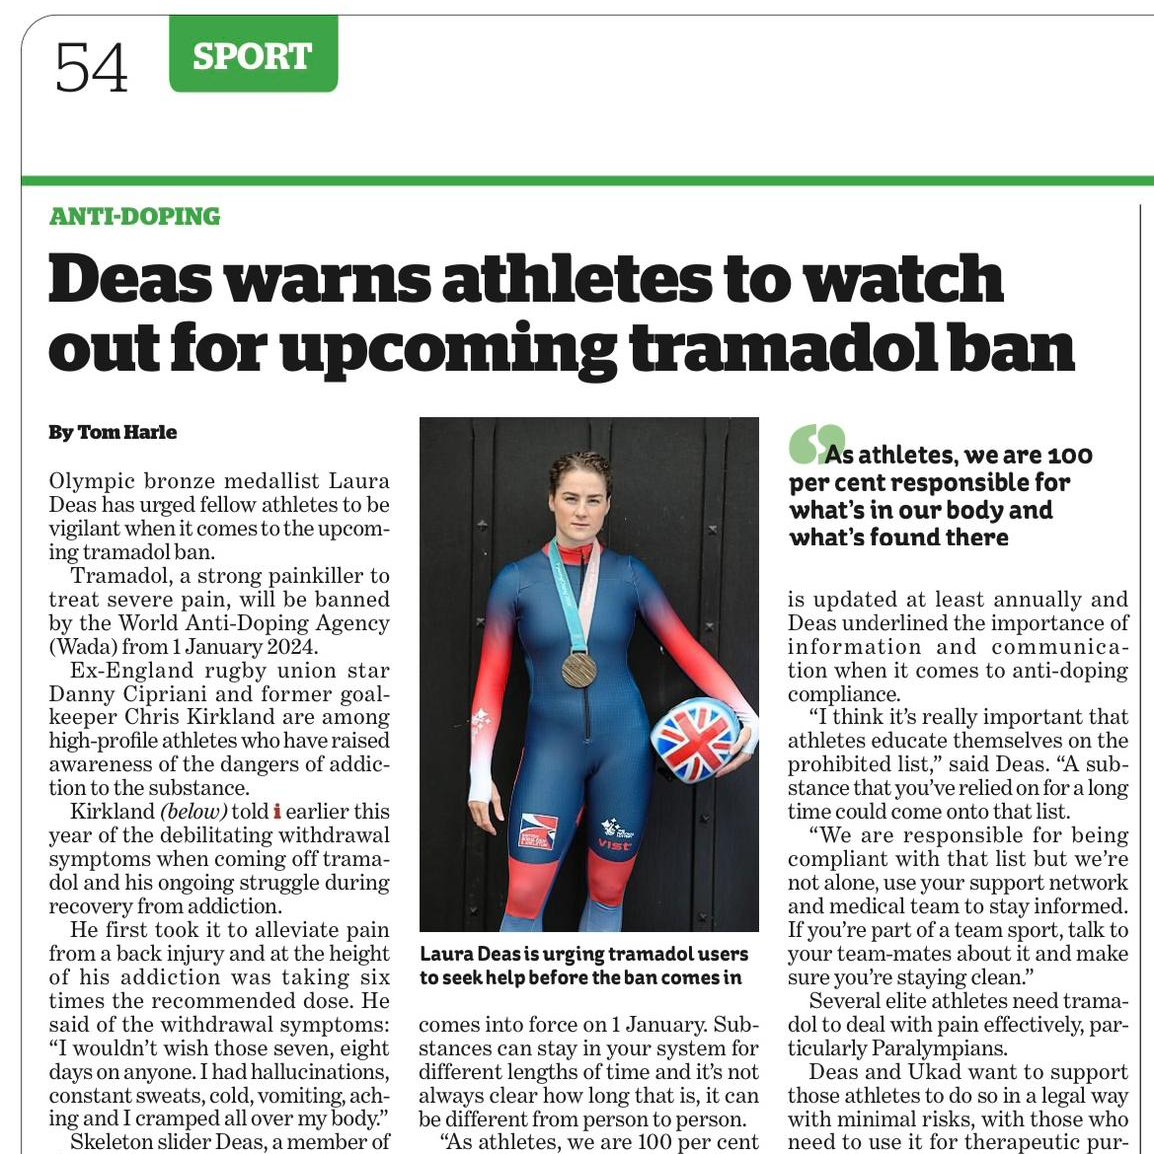 ‼️ @Sportsbeat x @ukantidoping x @skeletonlaura = raising awareness of the upcoming WADA ban on tramadol. “Tramadol can be a dangerous substance and addiction is something to be very wary of.' Last week in @iPaperSport 👇